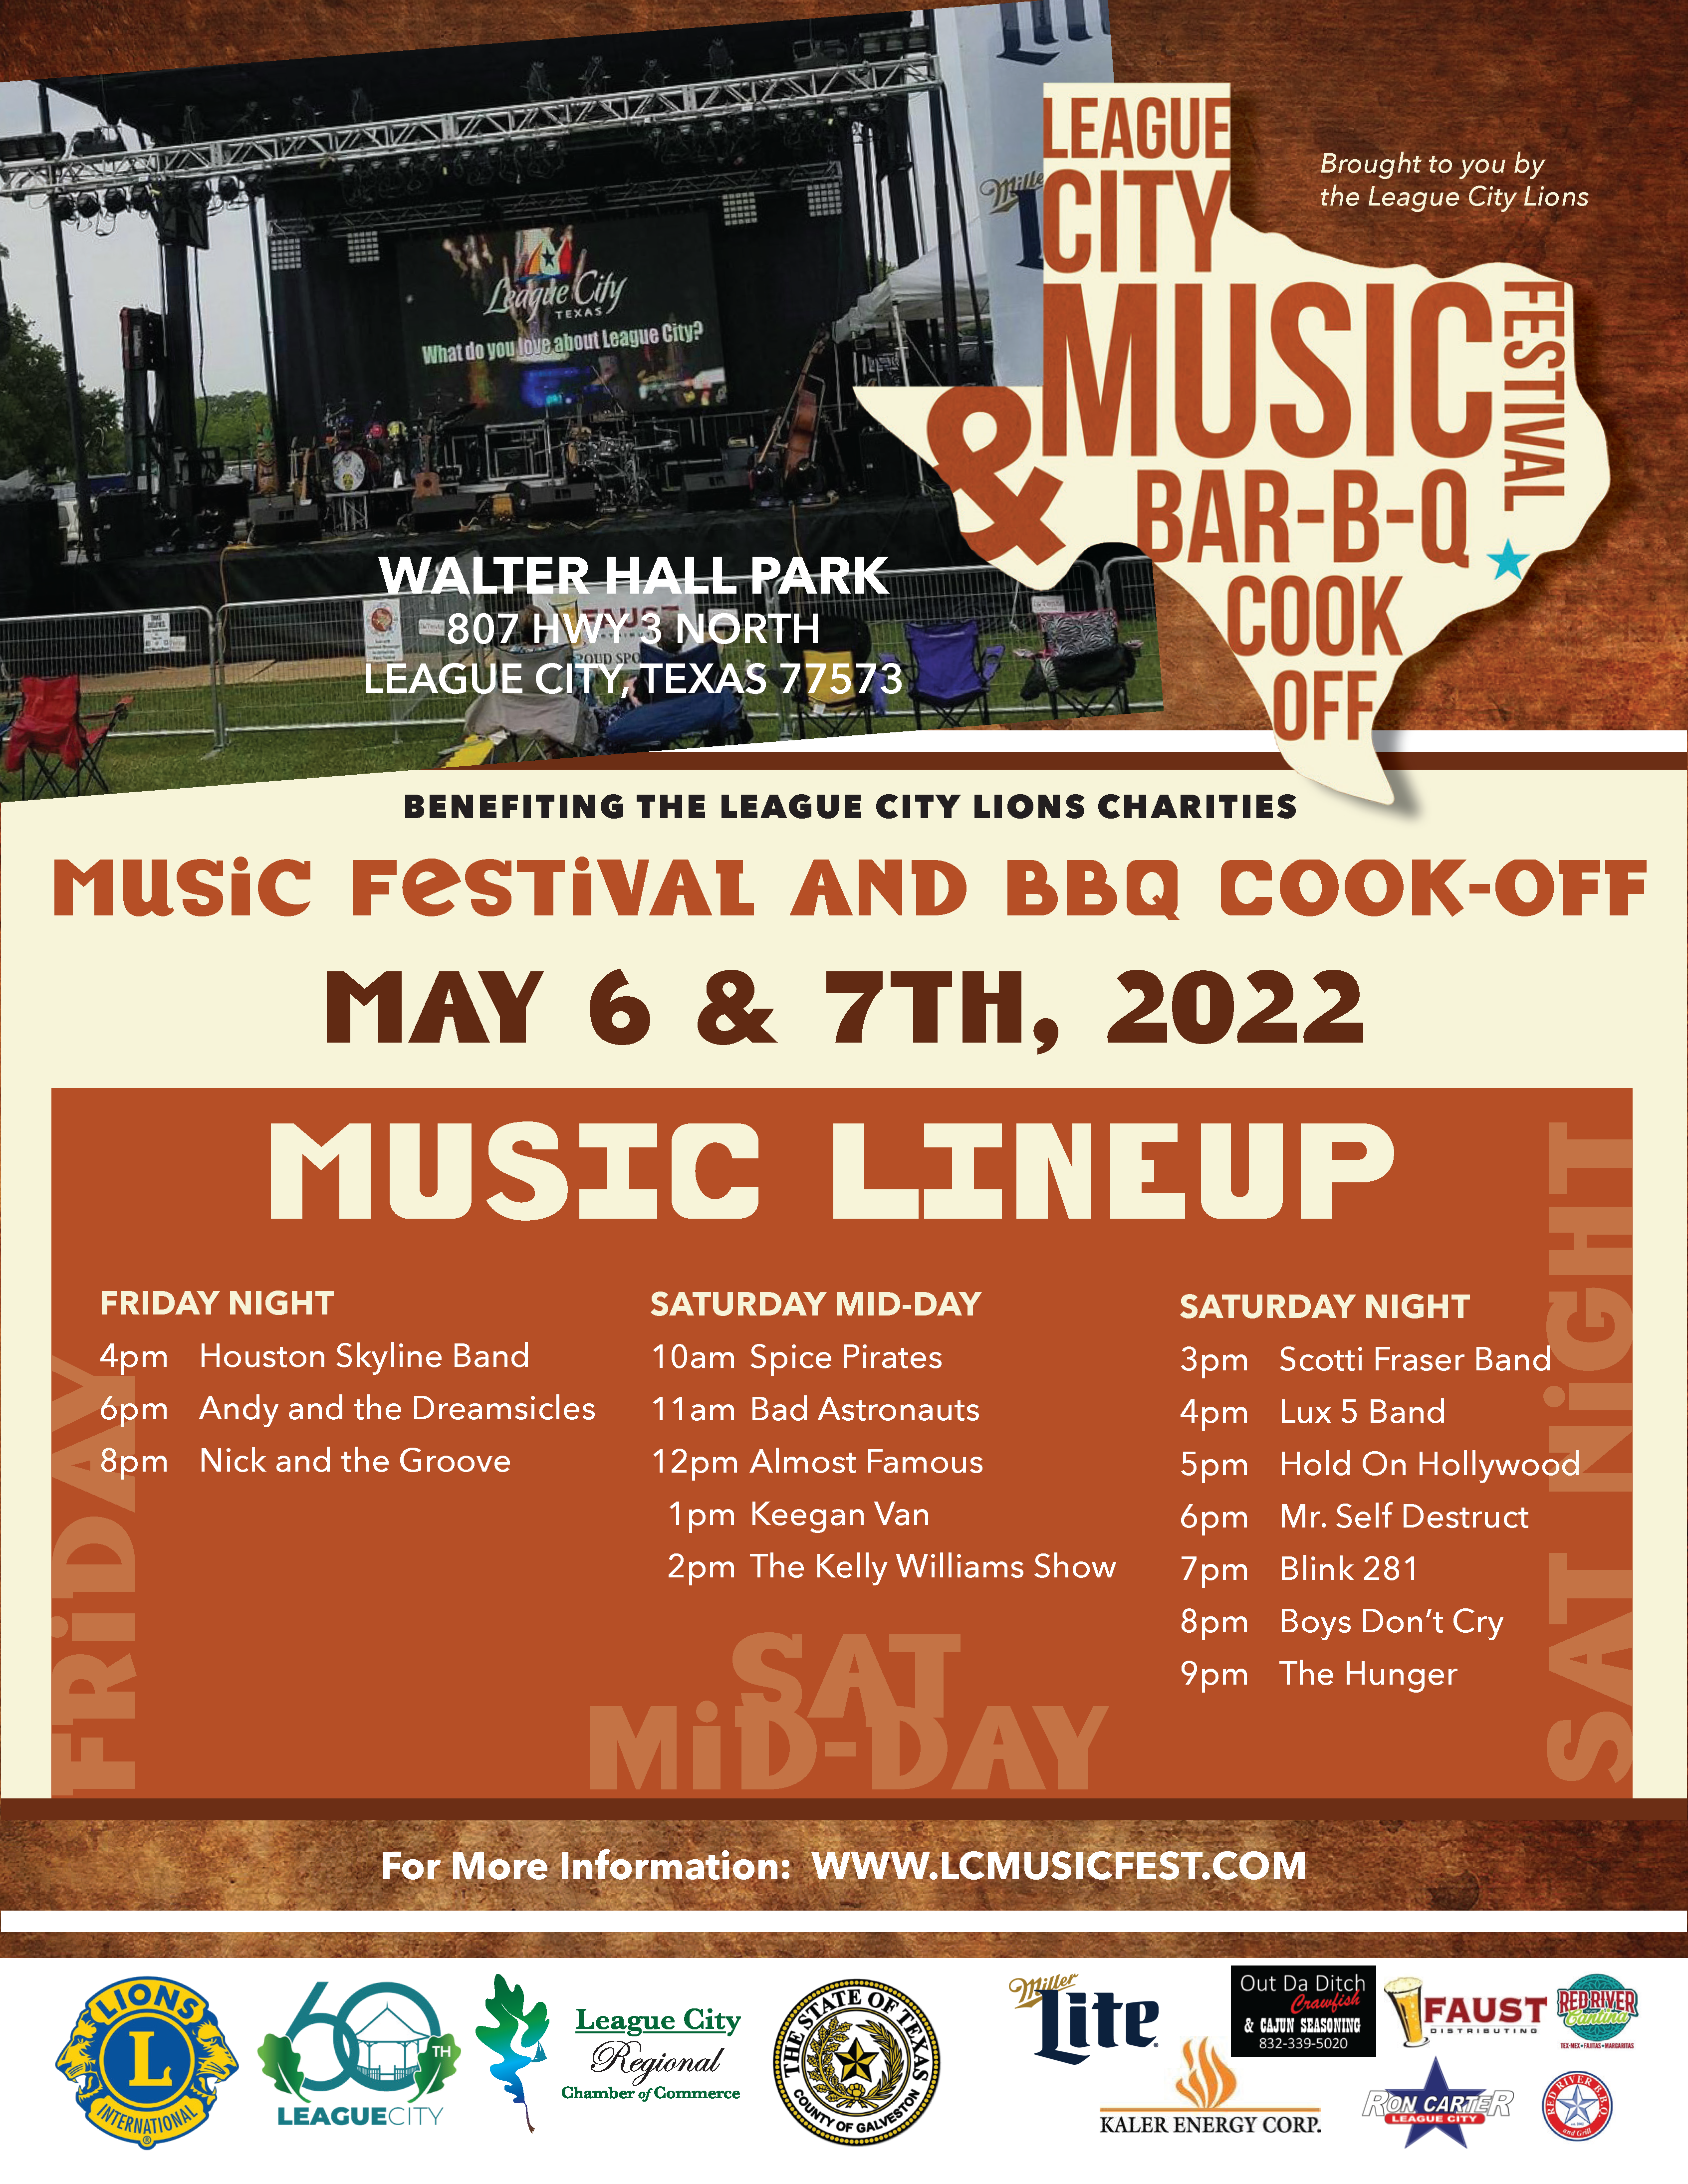 Image for Make your business HEARD when you Sponsor at the League City Music Festival!